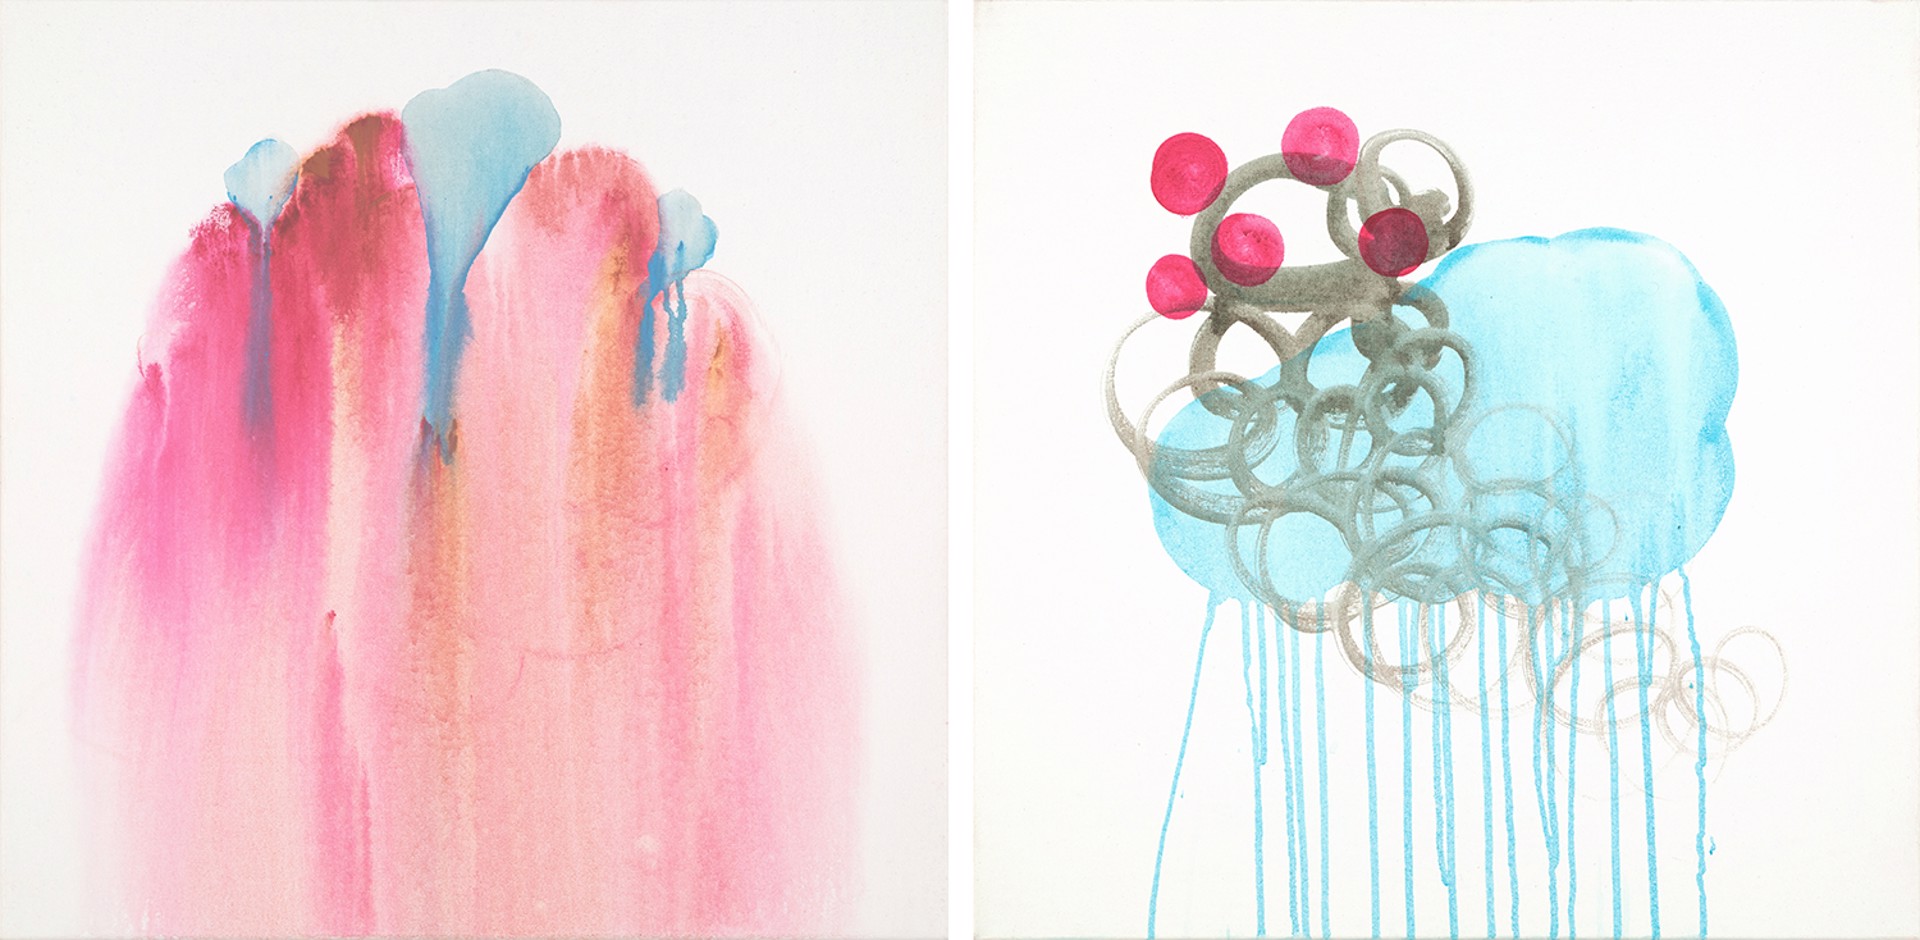 Untitled Tumble and Swell Diptych by Shawn Hall